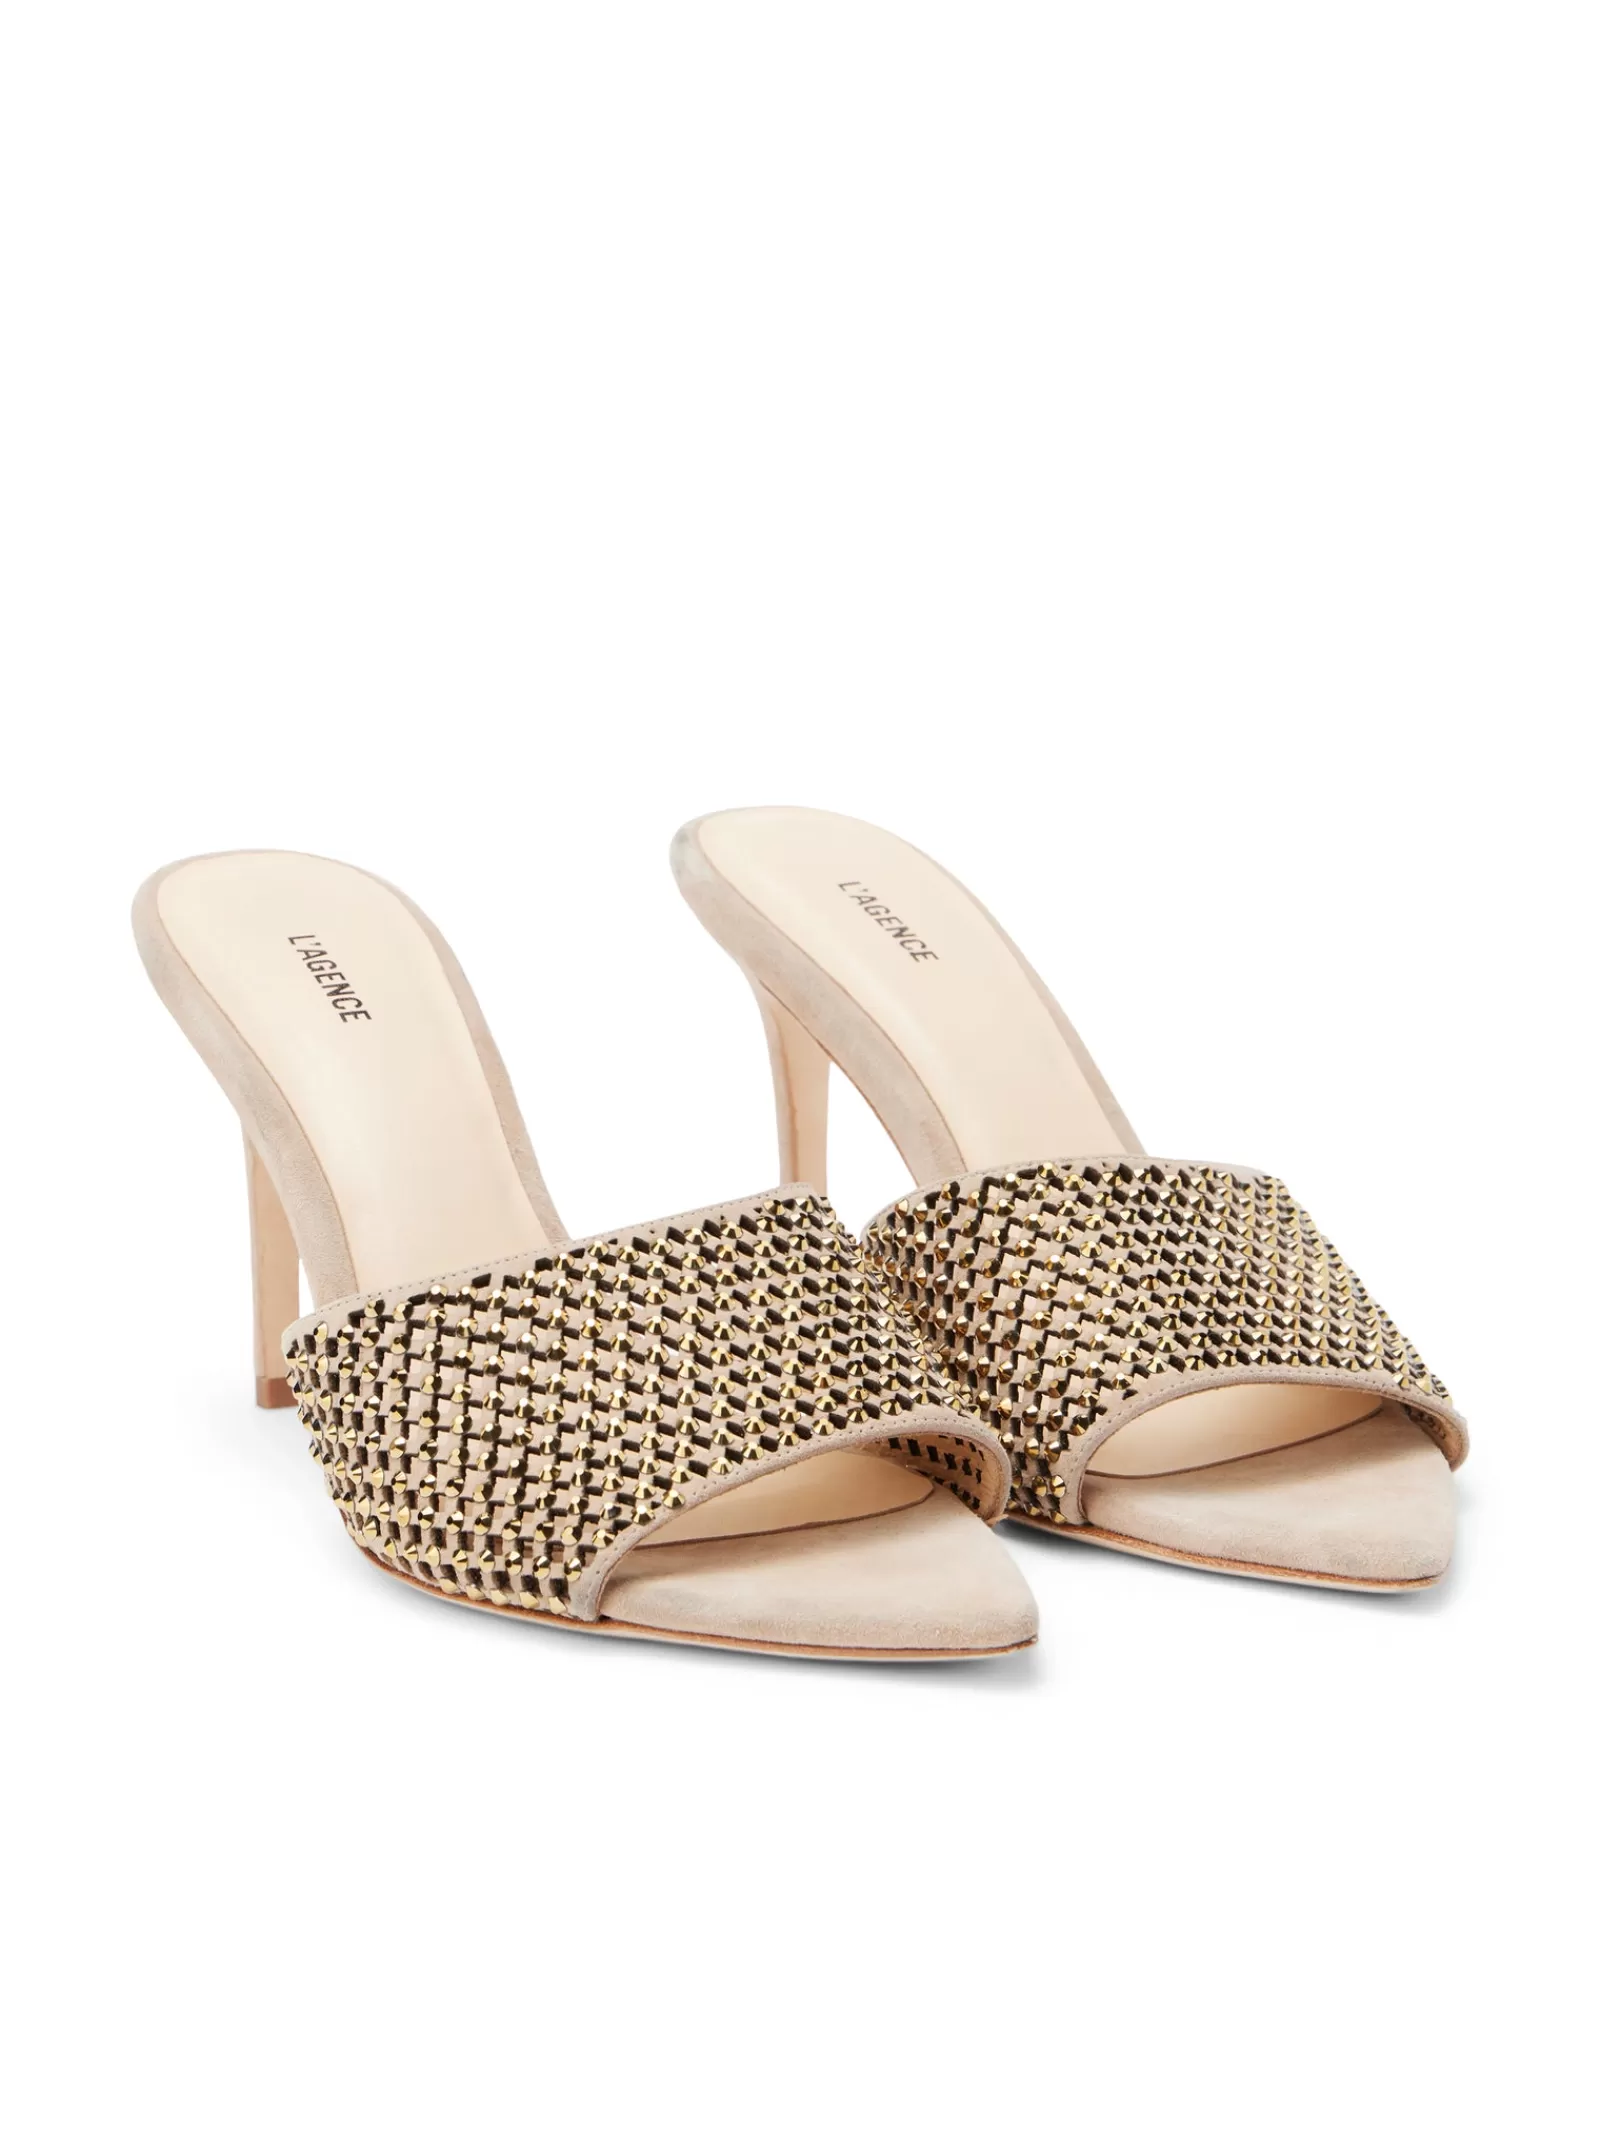 L'AGENCE Narcise Open Toe Mule< Resort Collection | Mules